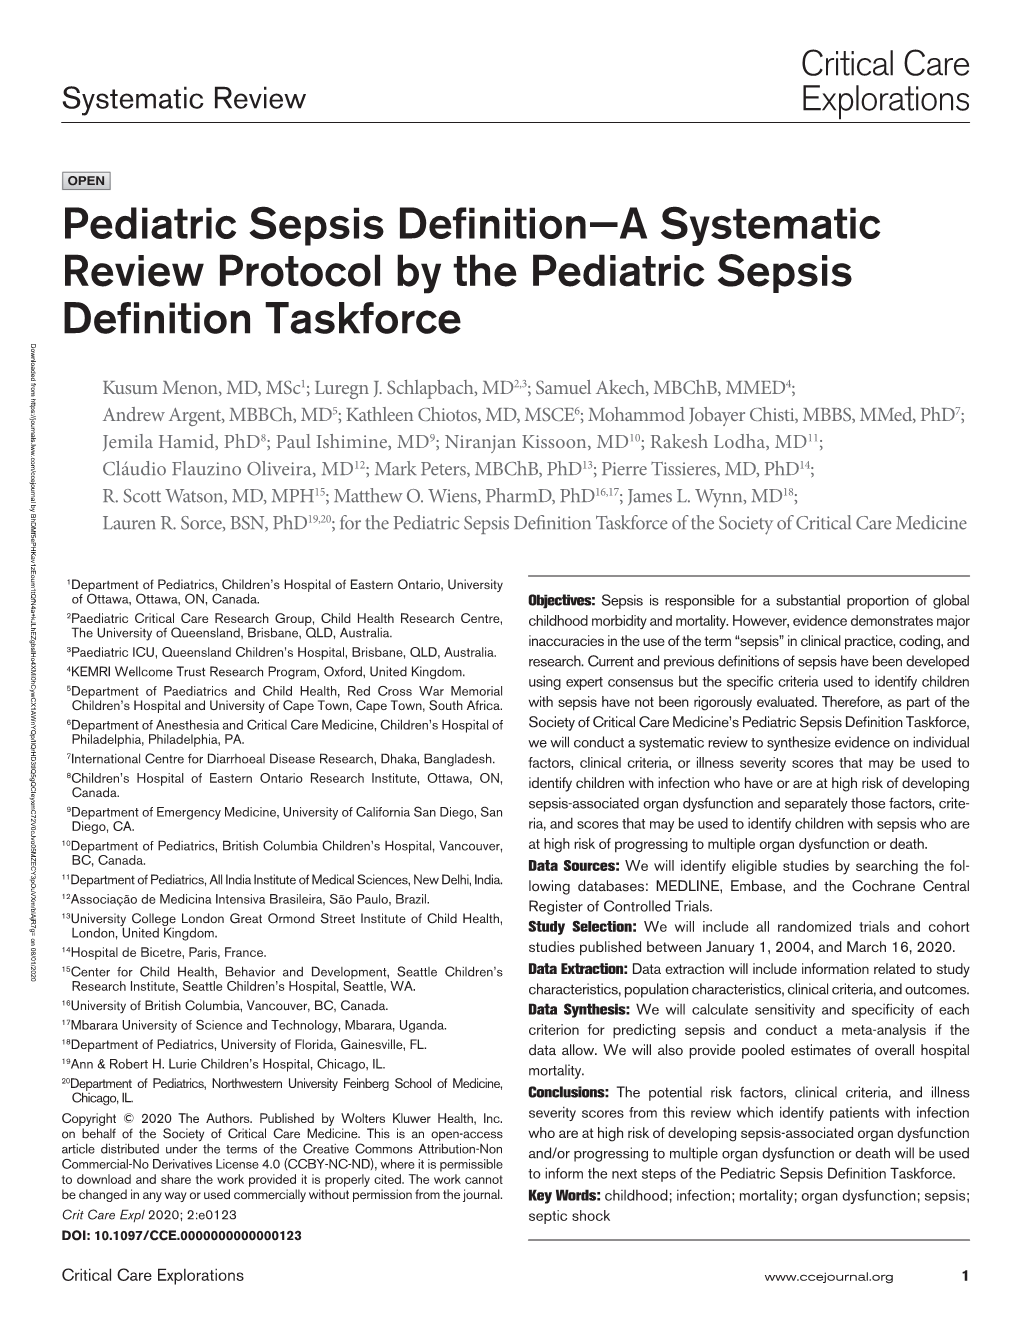 Pediatric Sepsis Definition—A Systematic Review